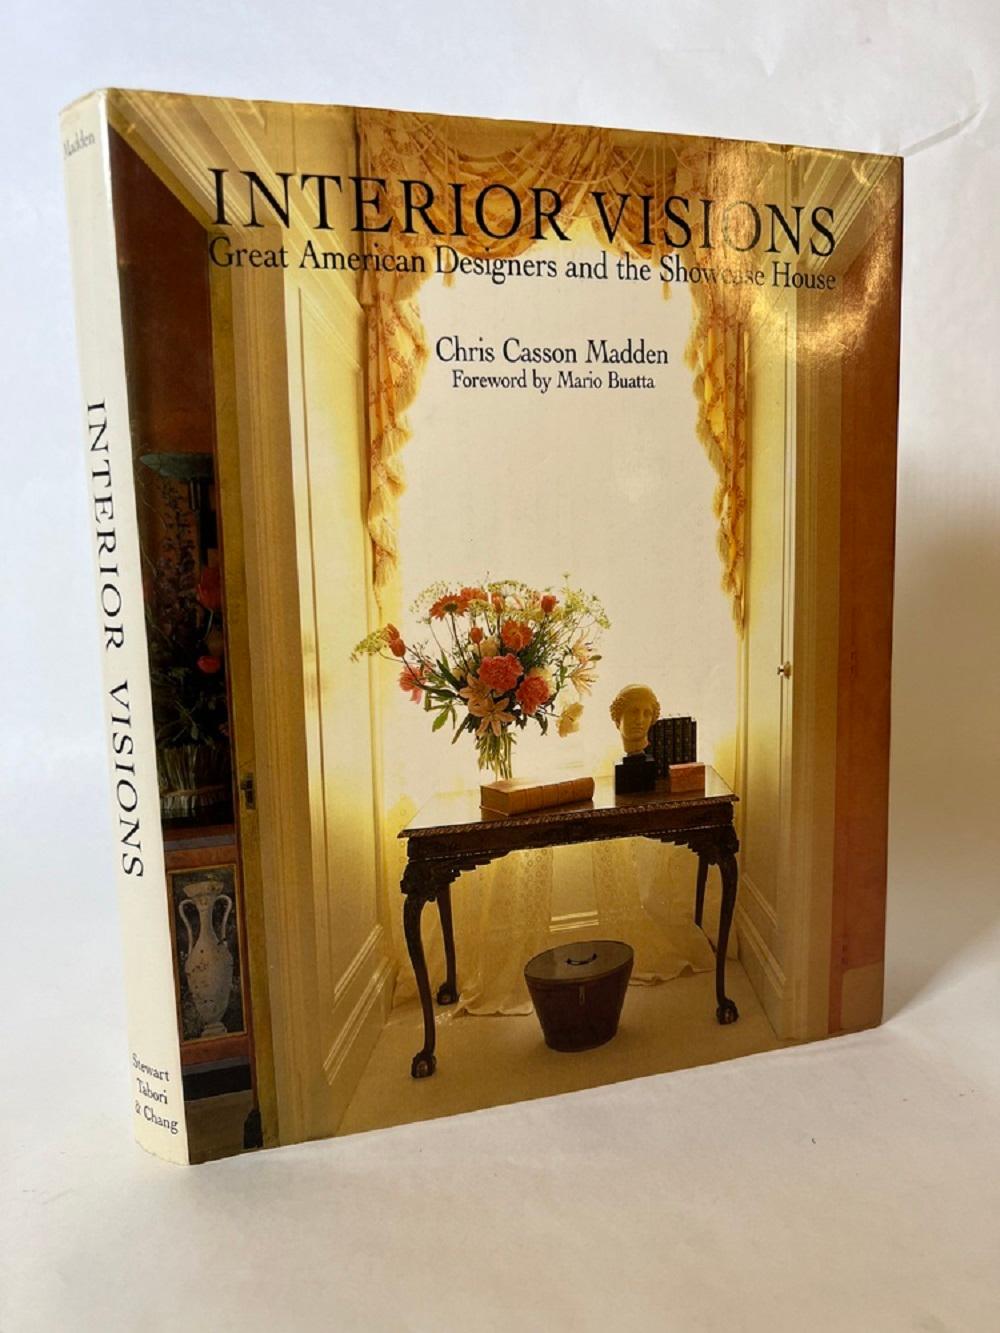 Interior Visions Great American Designers by Chris Casson Madden Hardcover 1988 For Sale 1